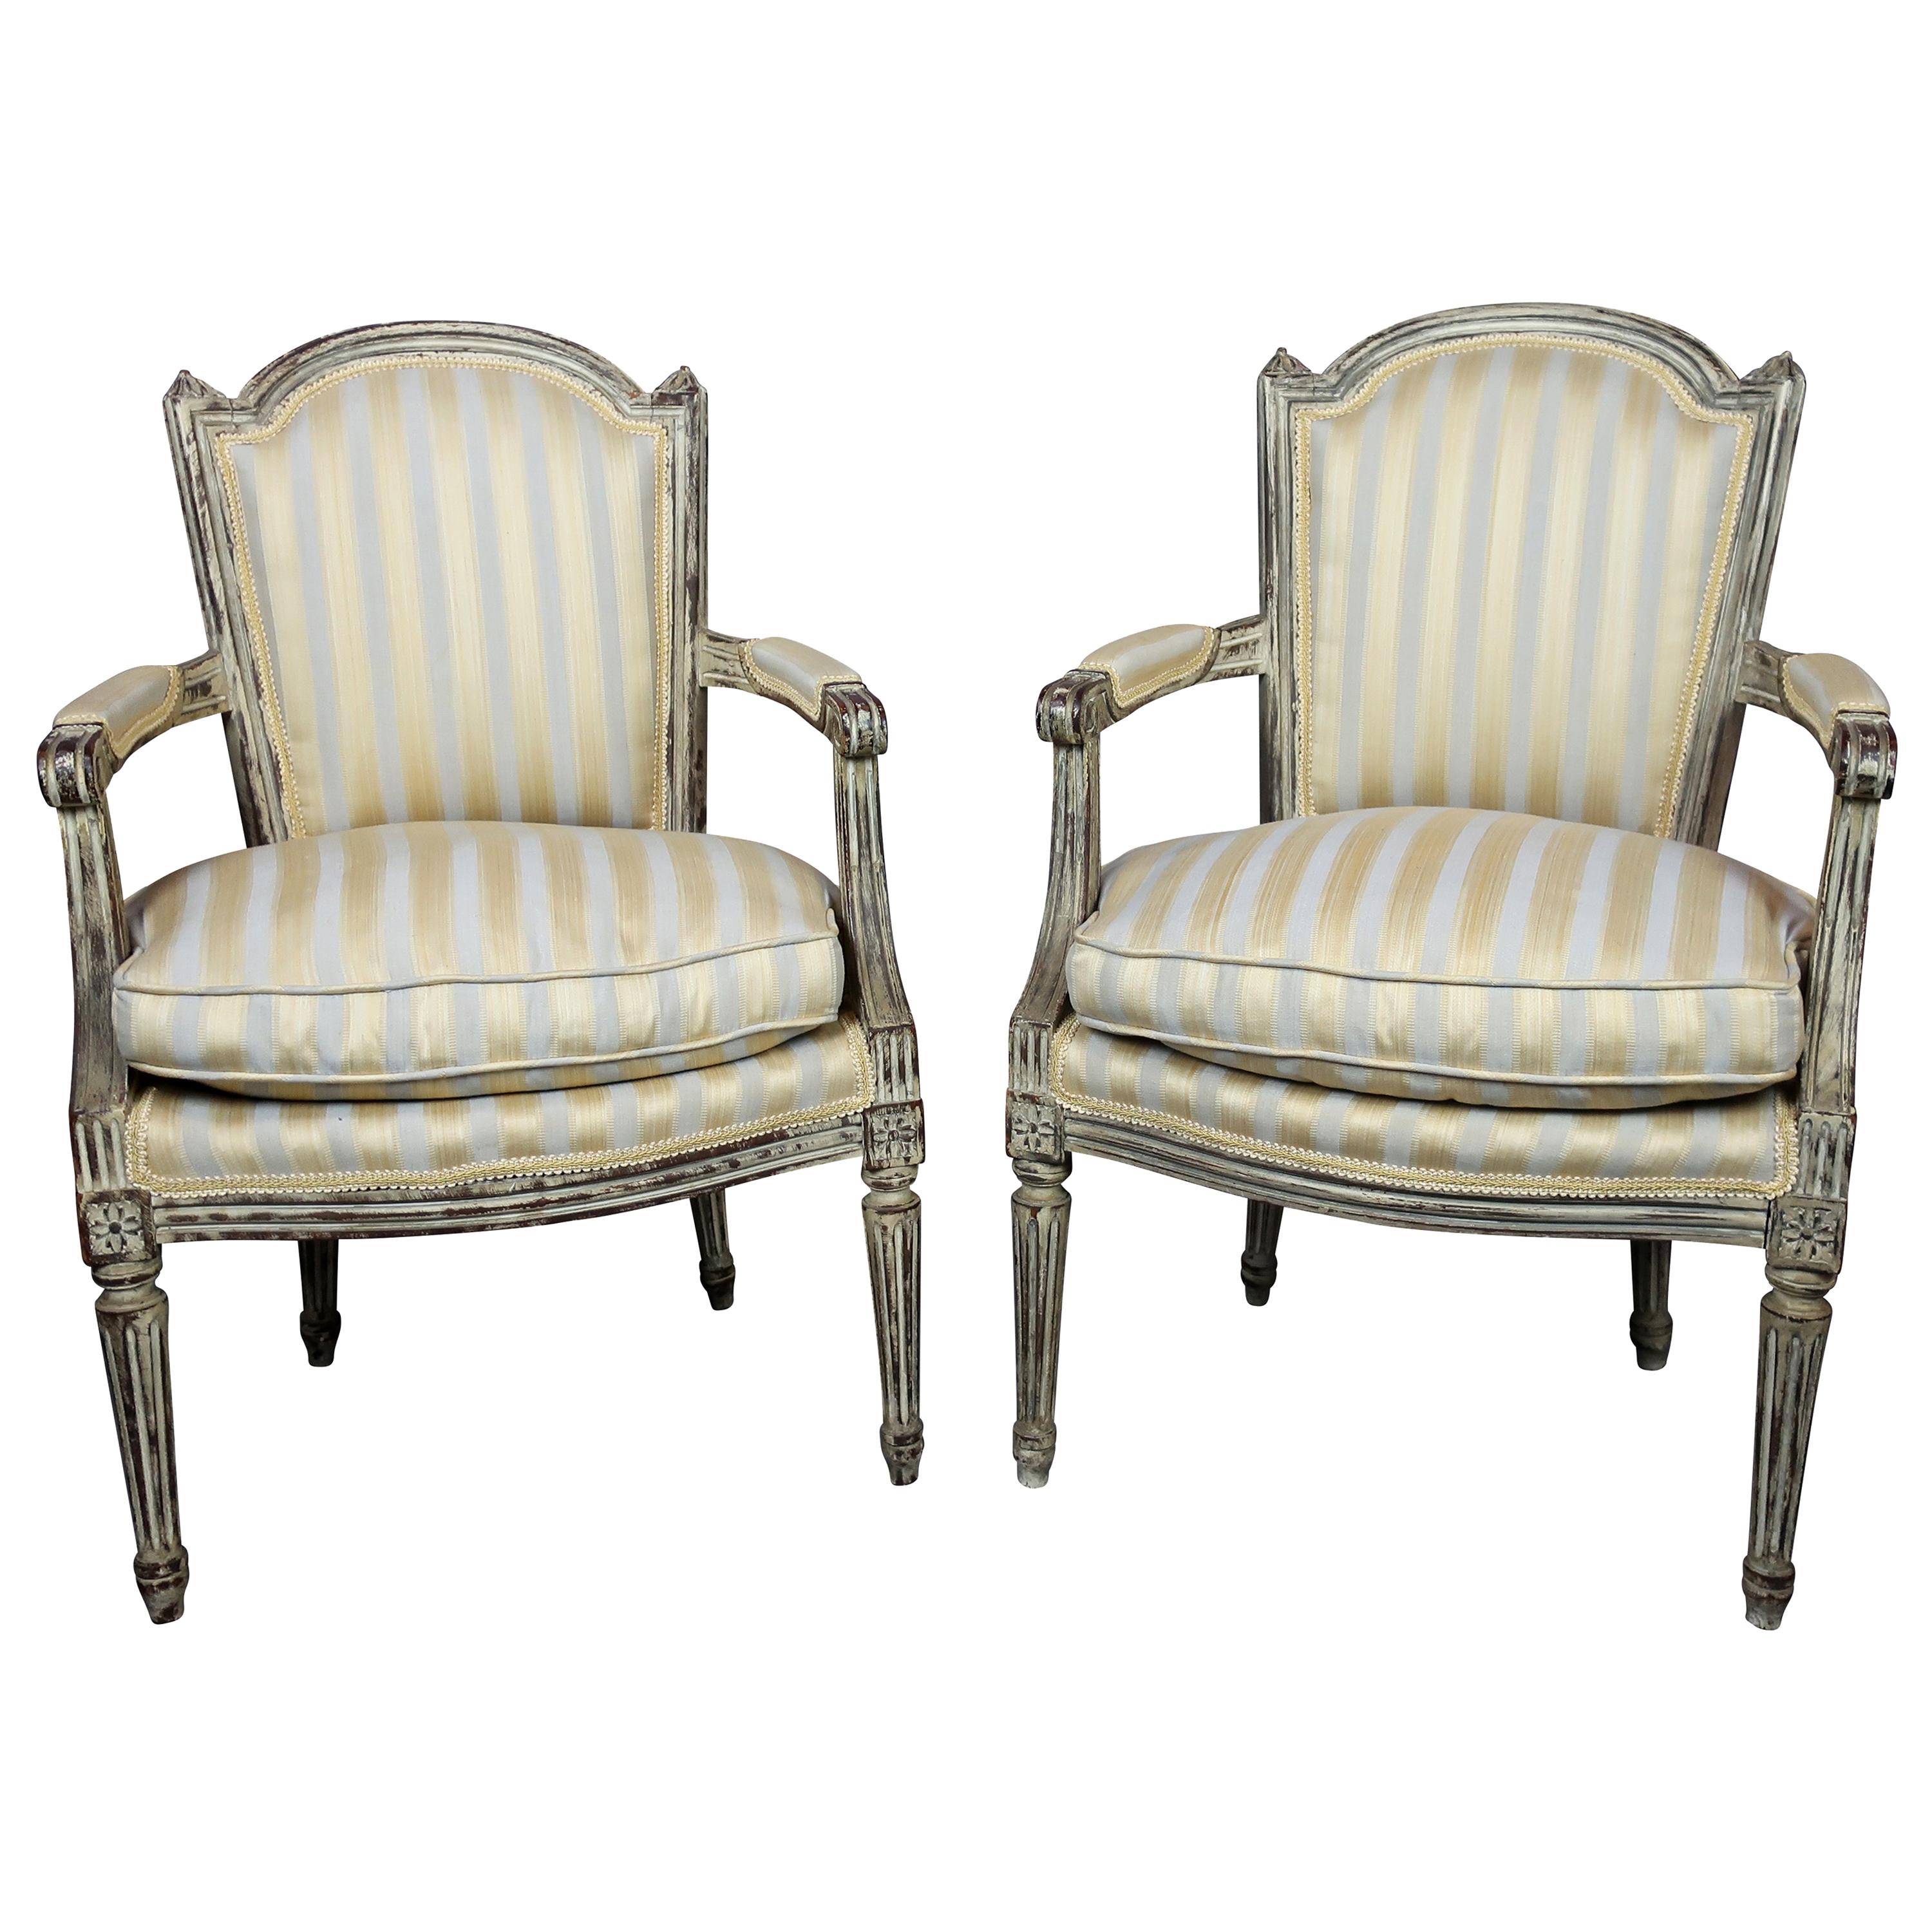  Grey Painted Pair of 19th Century French Louis XVI Upholstered Chairs 